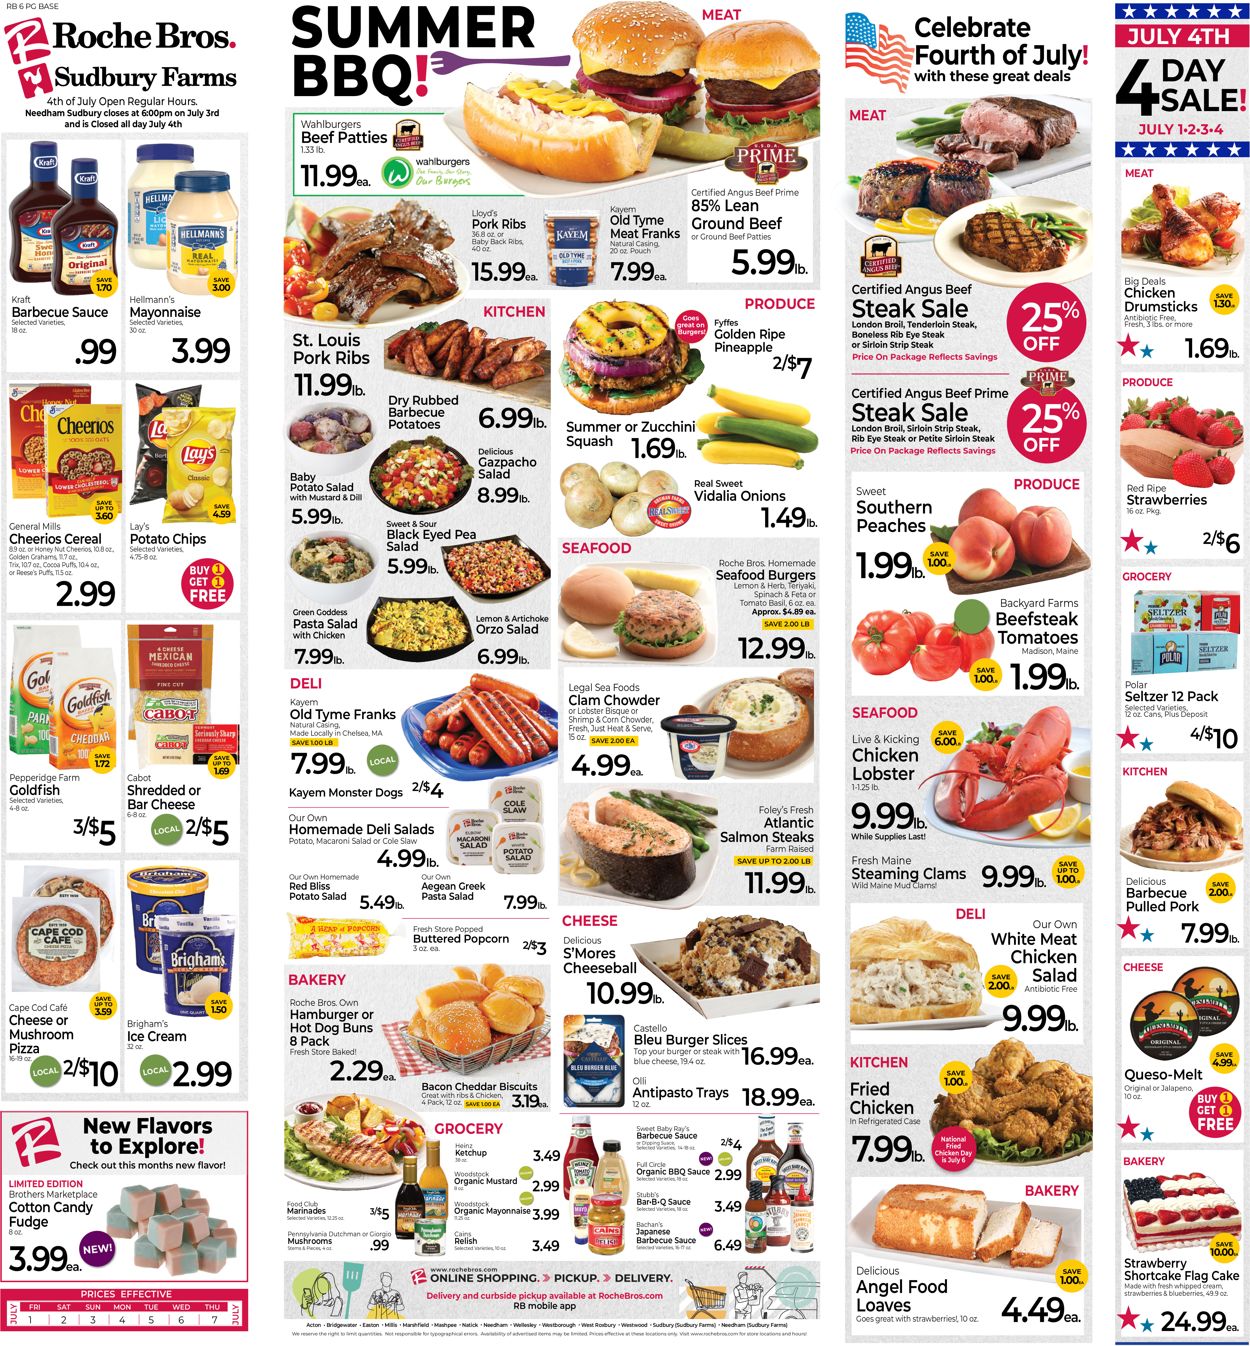 Roche Bros. Supermarkets - 4th of July Sale Weekly Ad Circular - valid 07/01-07/07/2022